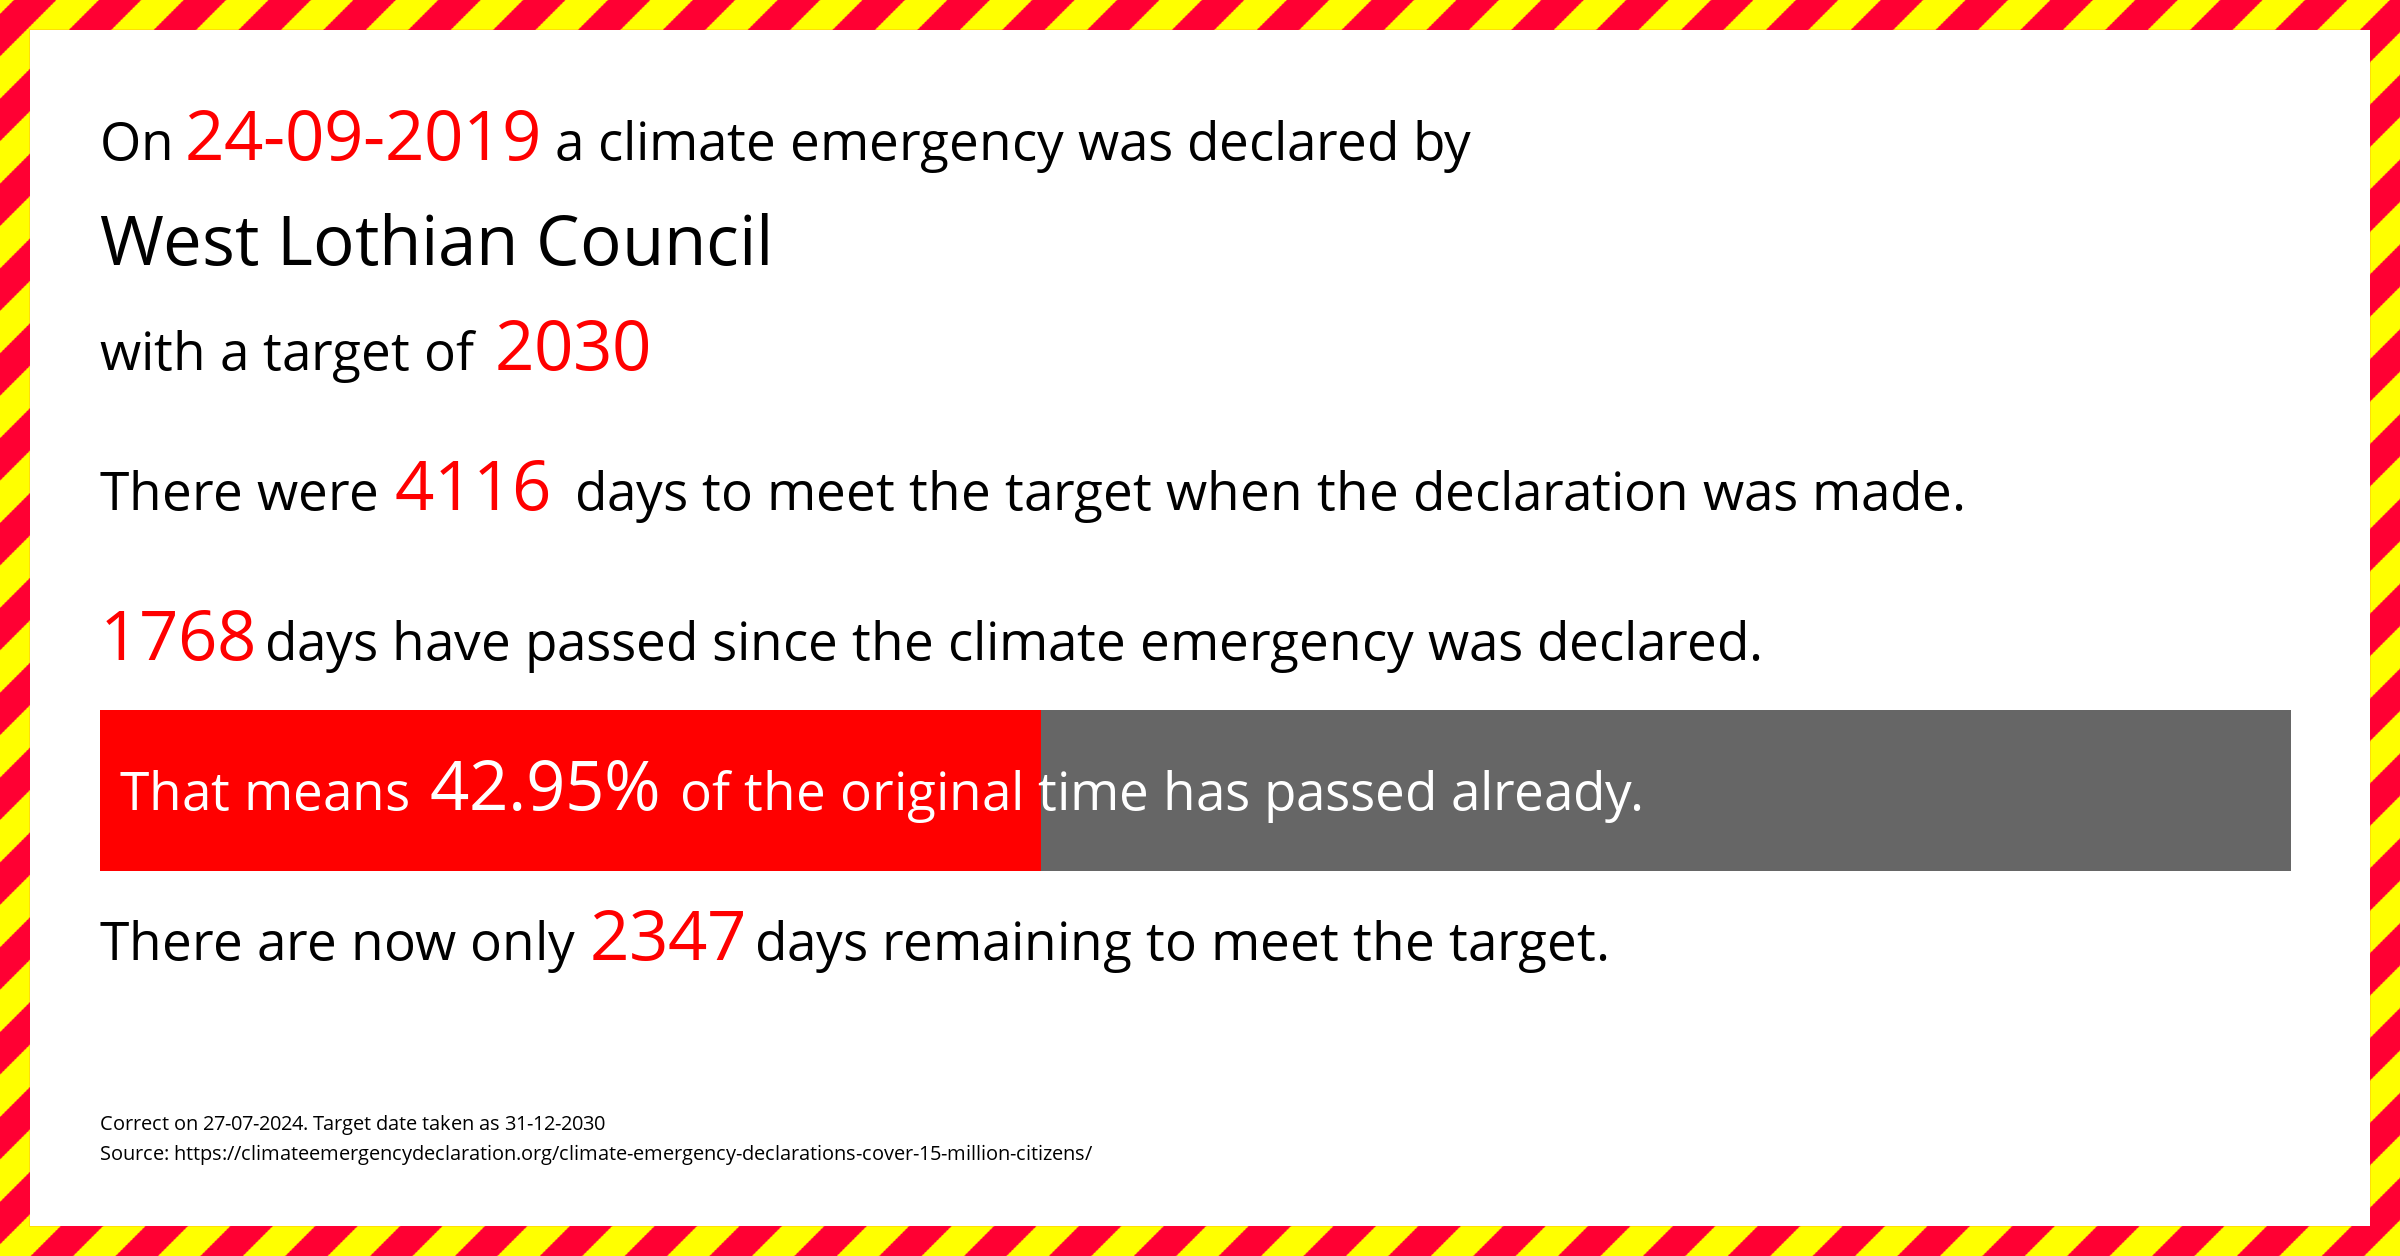 West Lothian Council declared a Climate emergency on Tuesday 24th September 2019, with a target of 2030.